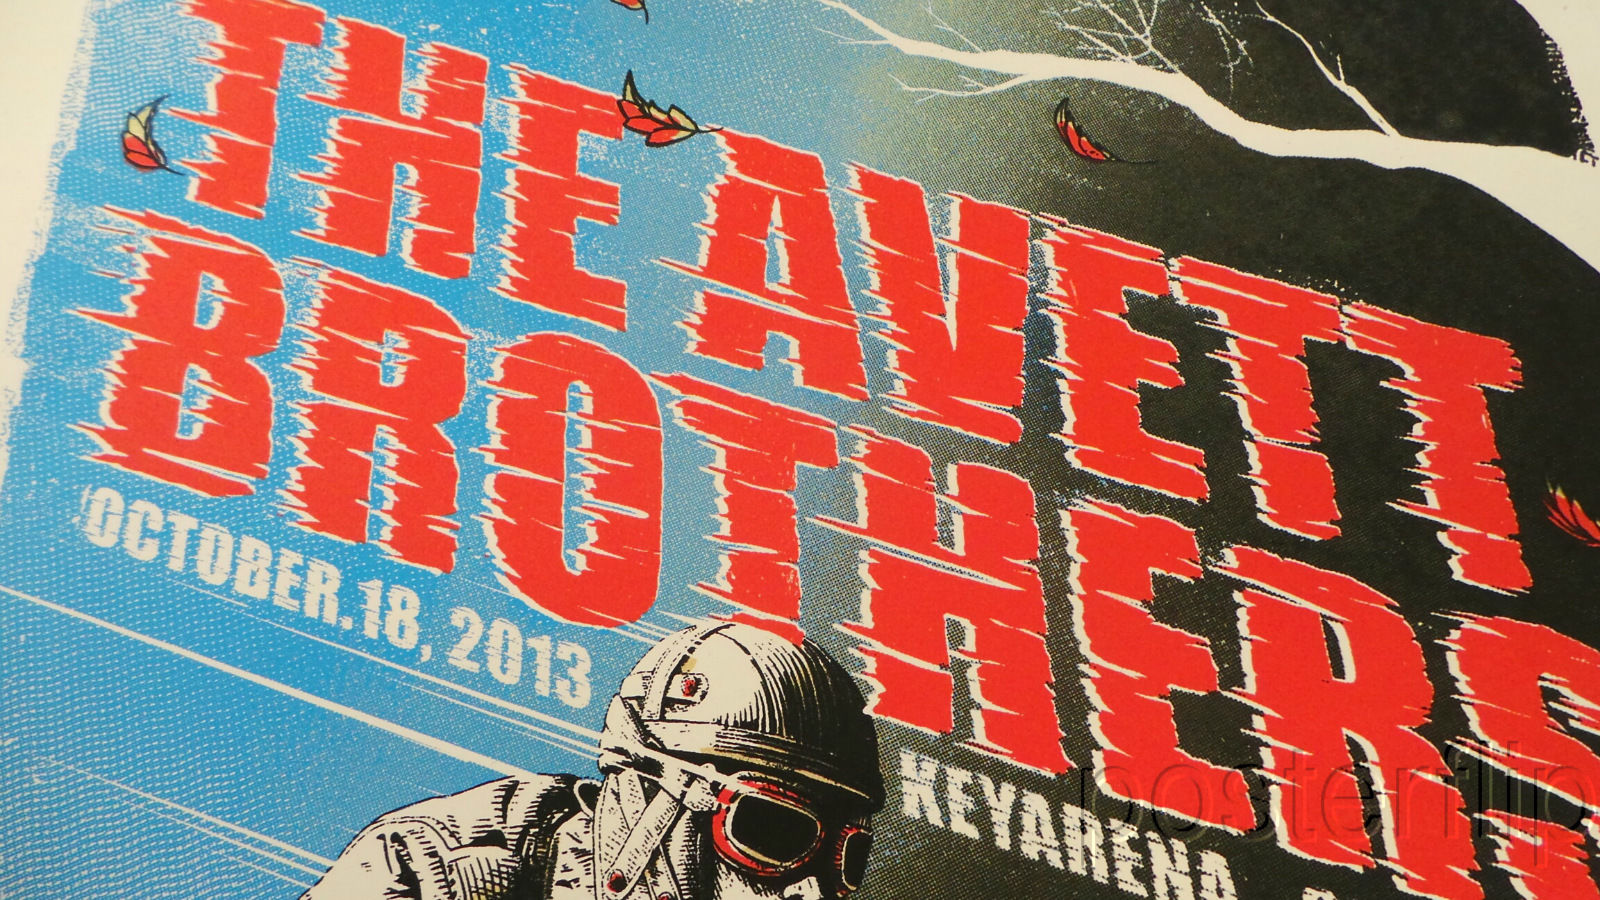 "The Avett Brothers (Seattle 2013)" by Zeb Love.  Created for the band's 10/18/13 show at the KeyArena in Seattle, WA.